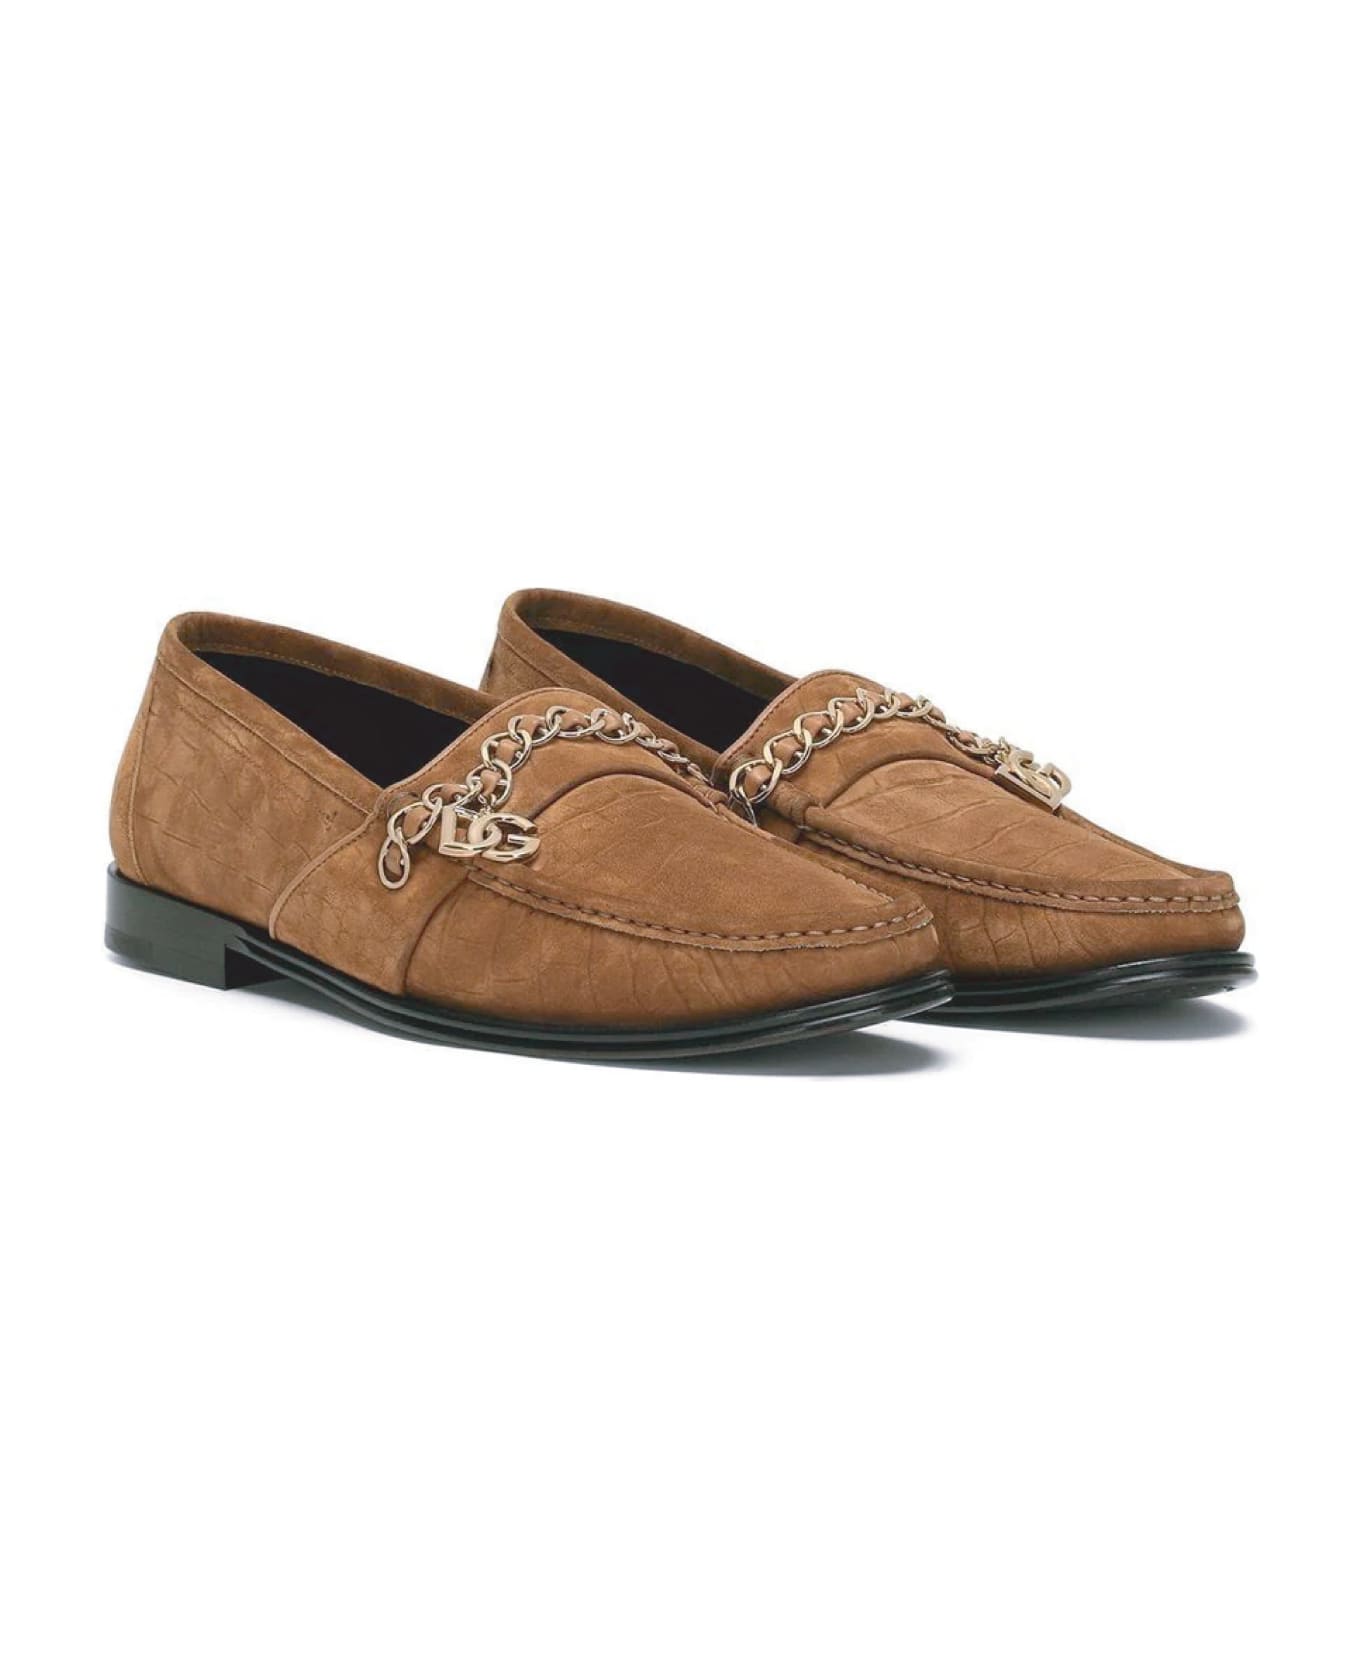 Dolce & Gabbana Suede Loafers - Brown ローファー＆デッキシューズ